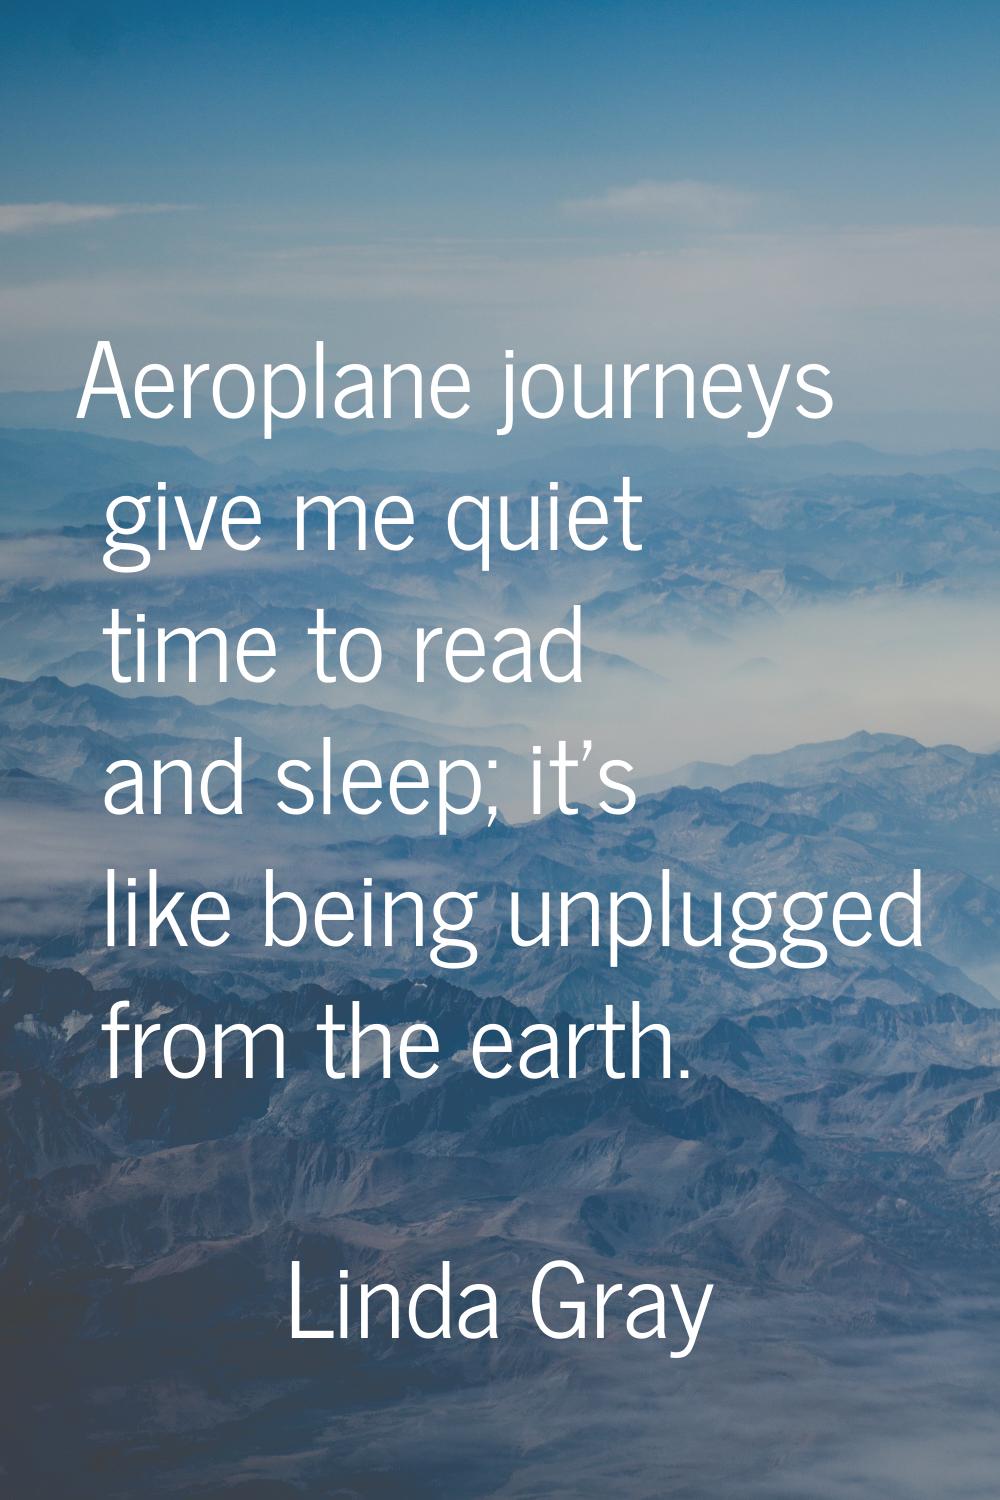 Aeroplane journeys give me quiet time to read and sleep; it's like being unplugged from the earth.